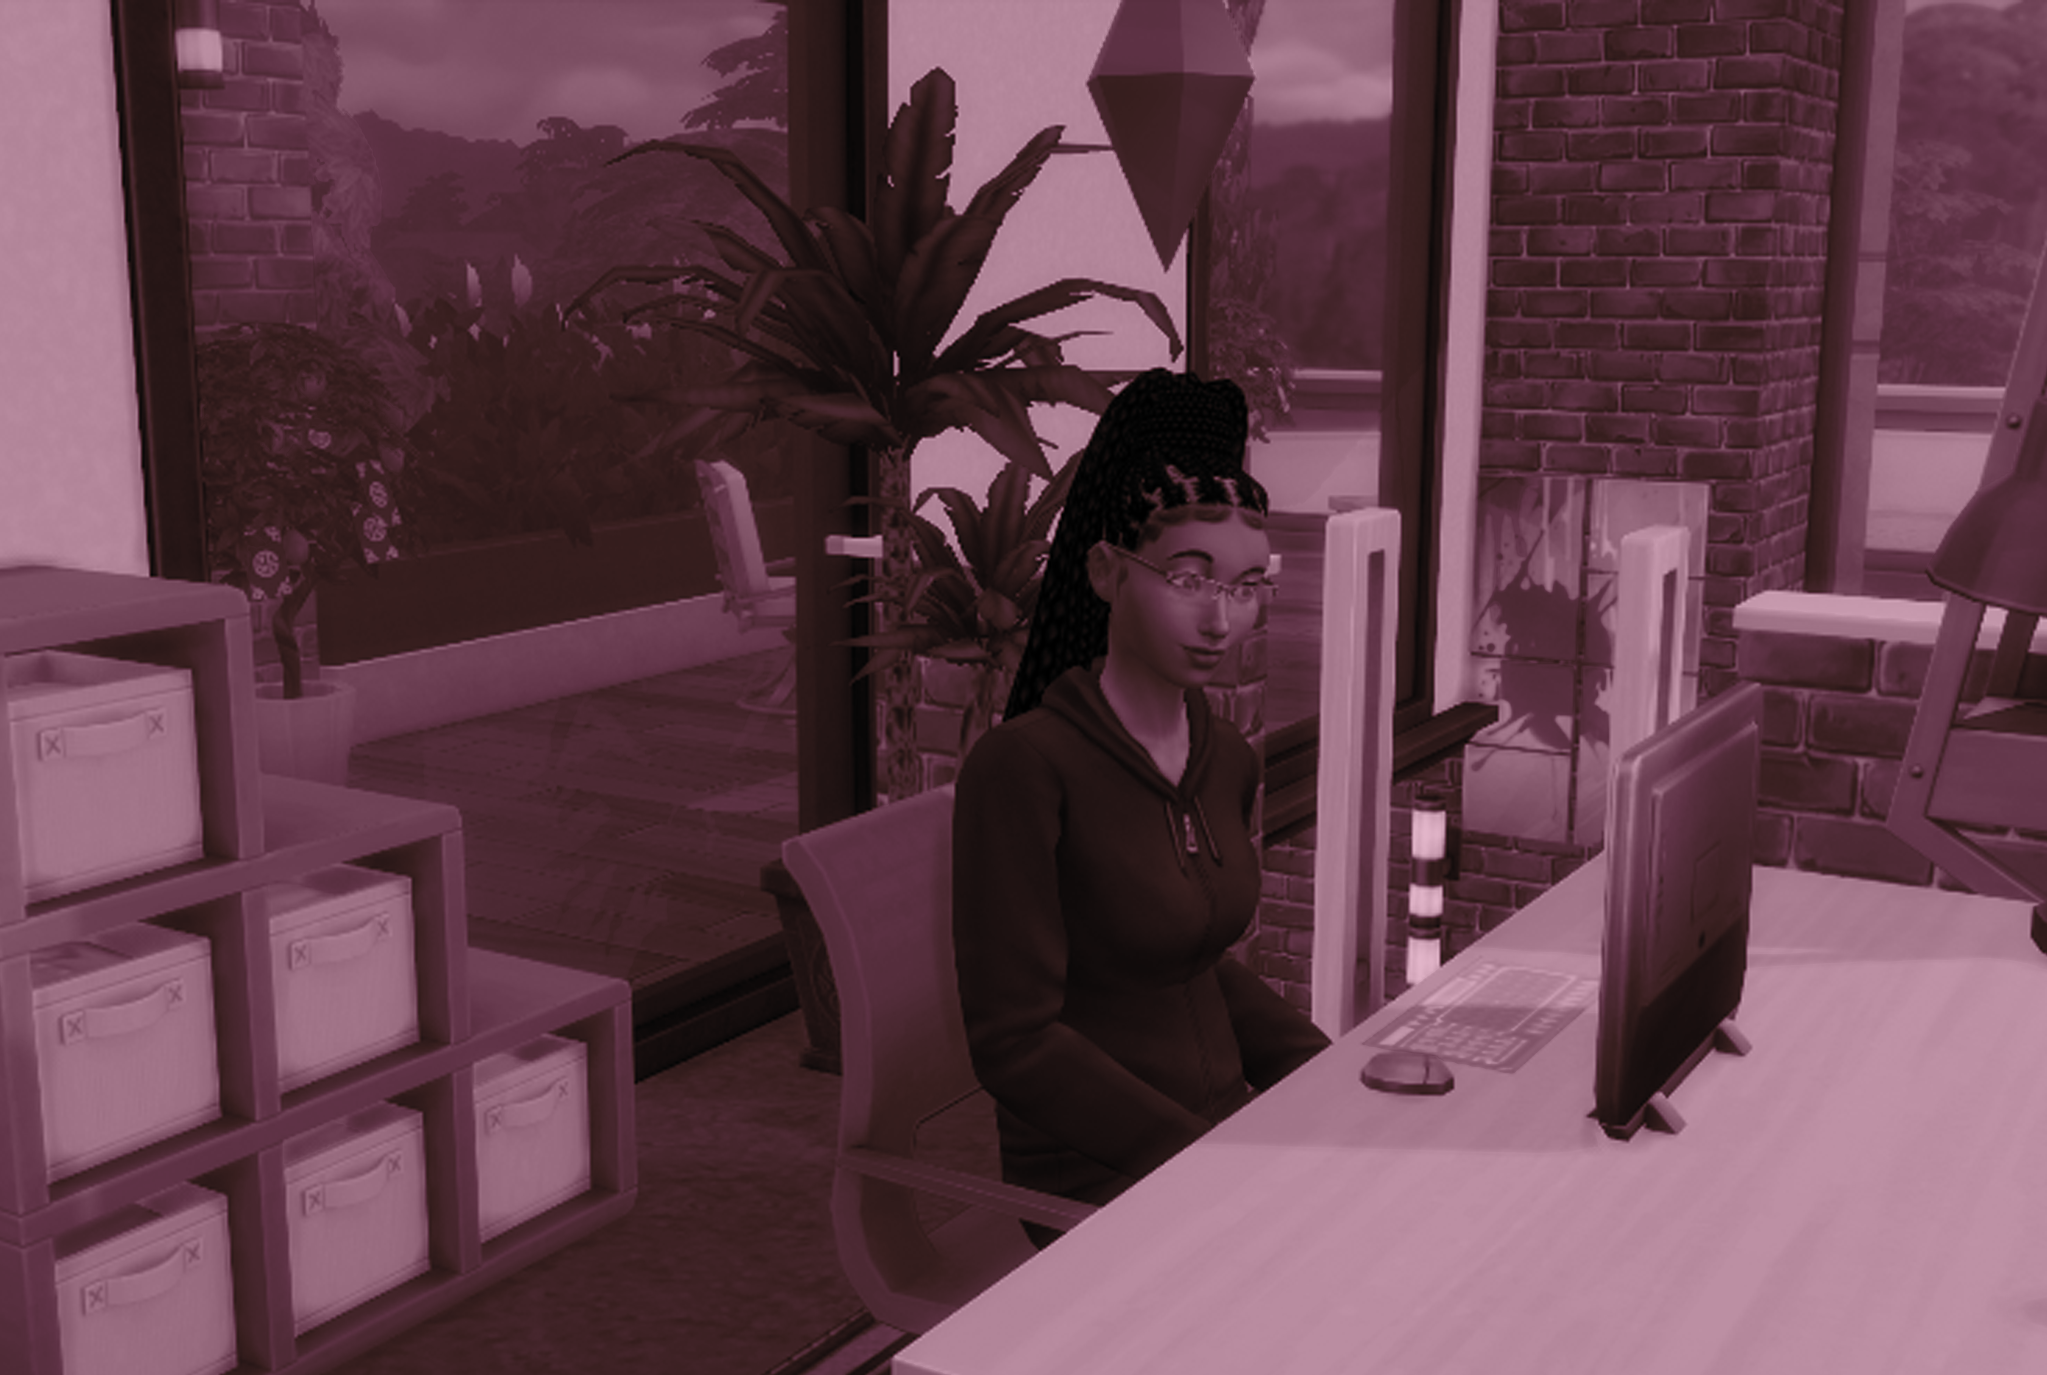 A Sims character, a Black woman with long hair, sits at a desk in front of a computer.